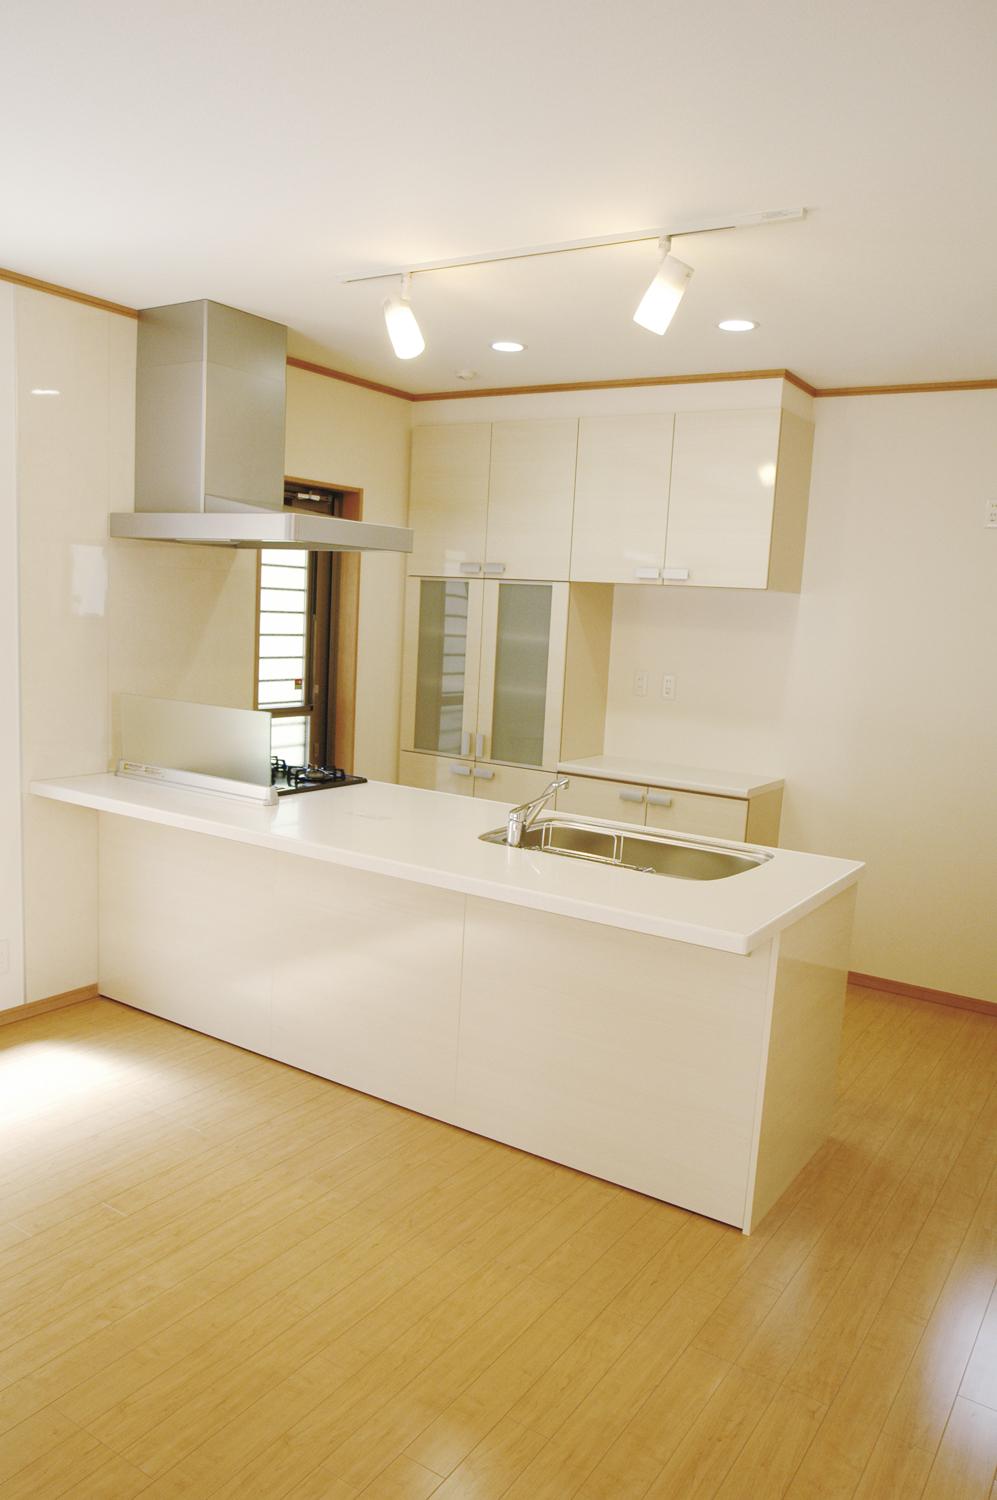 Kitchen. It is with dish washing dryer. Peninsula type so (kitchen protruding as from the walls of the peninsula), Your home can dish with peace of mind while watching the children a small child is present.